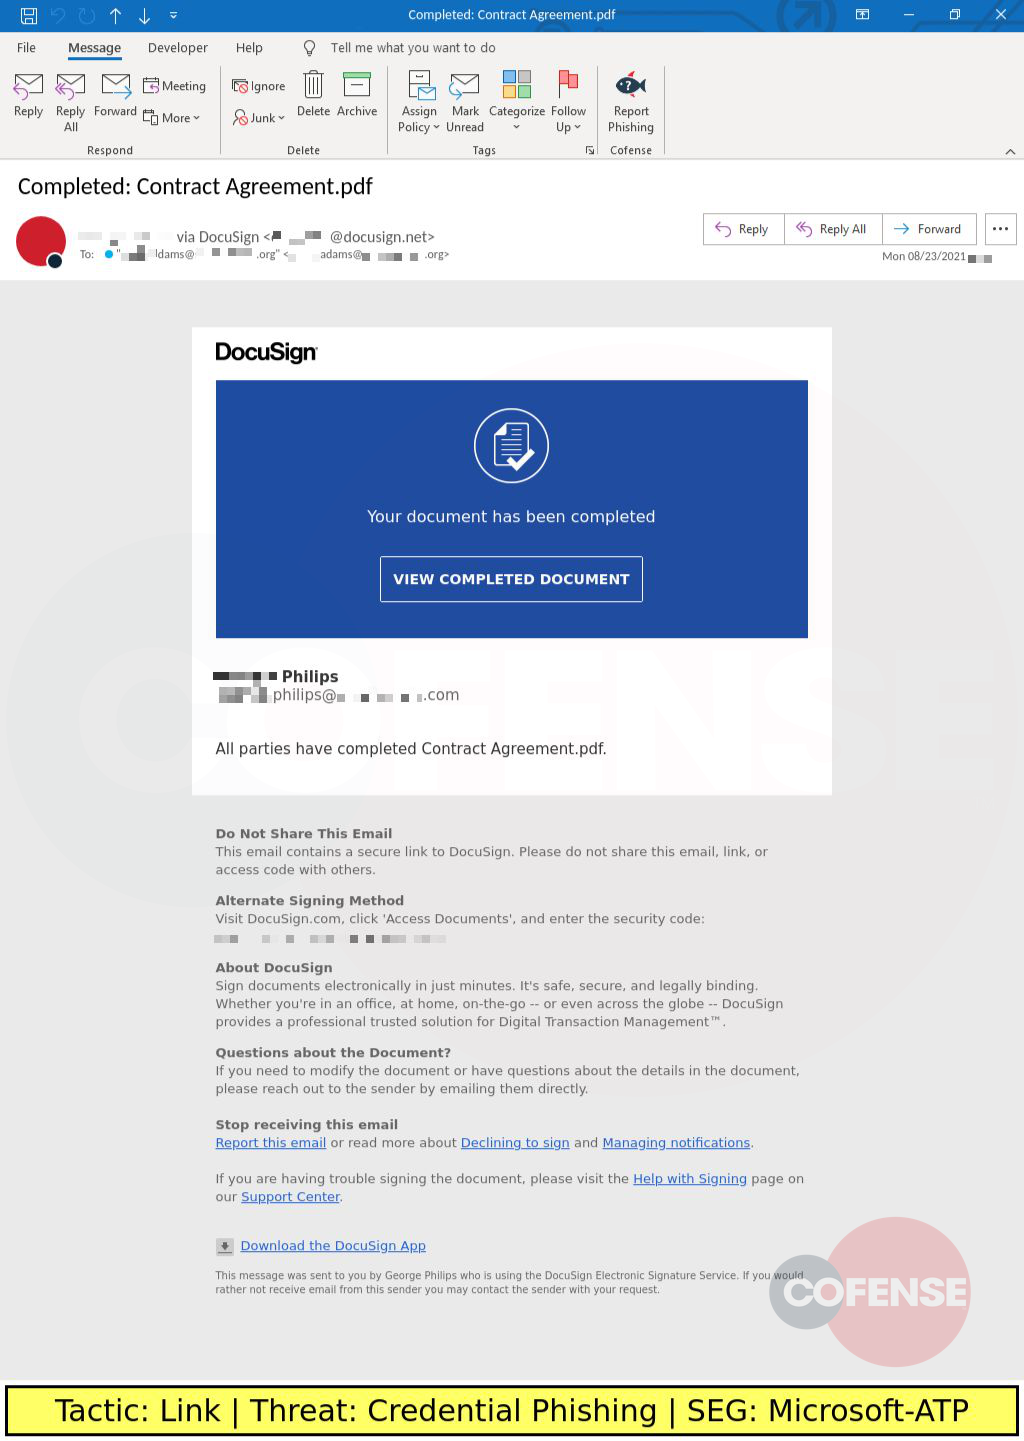 Real Phishing Example: Docusign-spoofed emails found in environments protected by Microsoft-ATP deliver Credential Phishing via an embedded link.